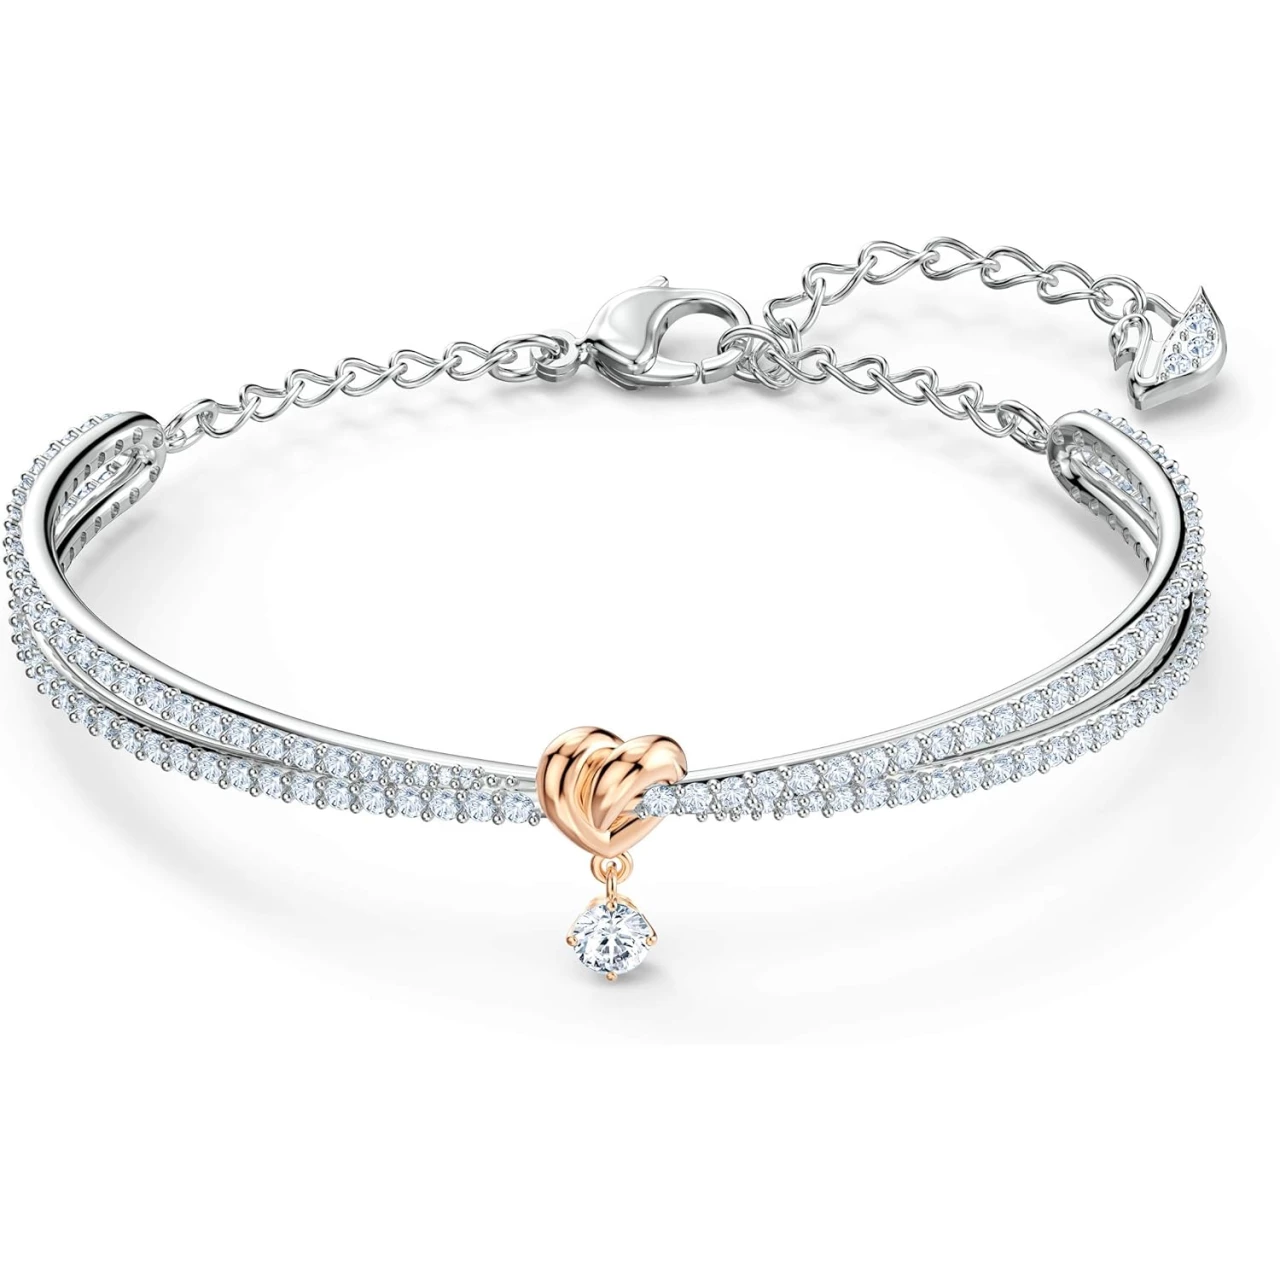 SWAROVSKI Lifelong Heart Necklace, Earrings, and Bracelet Crystal Jewelry Collection, Rose Gold &amp; Rhodium Tone Finish